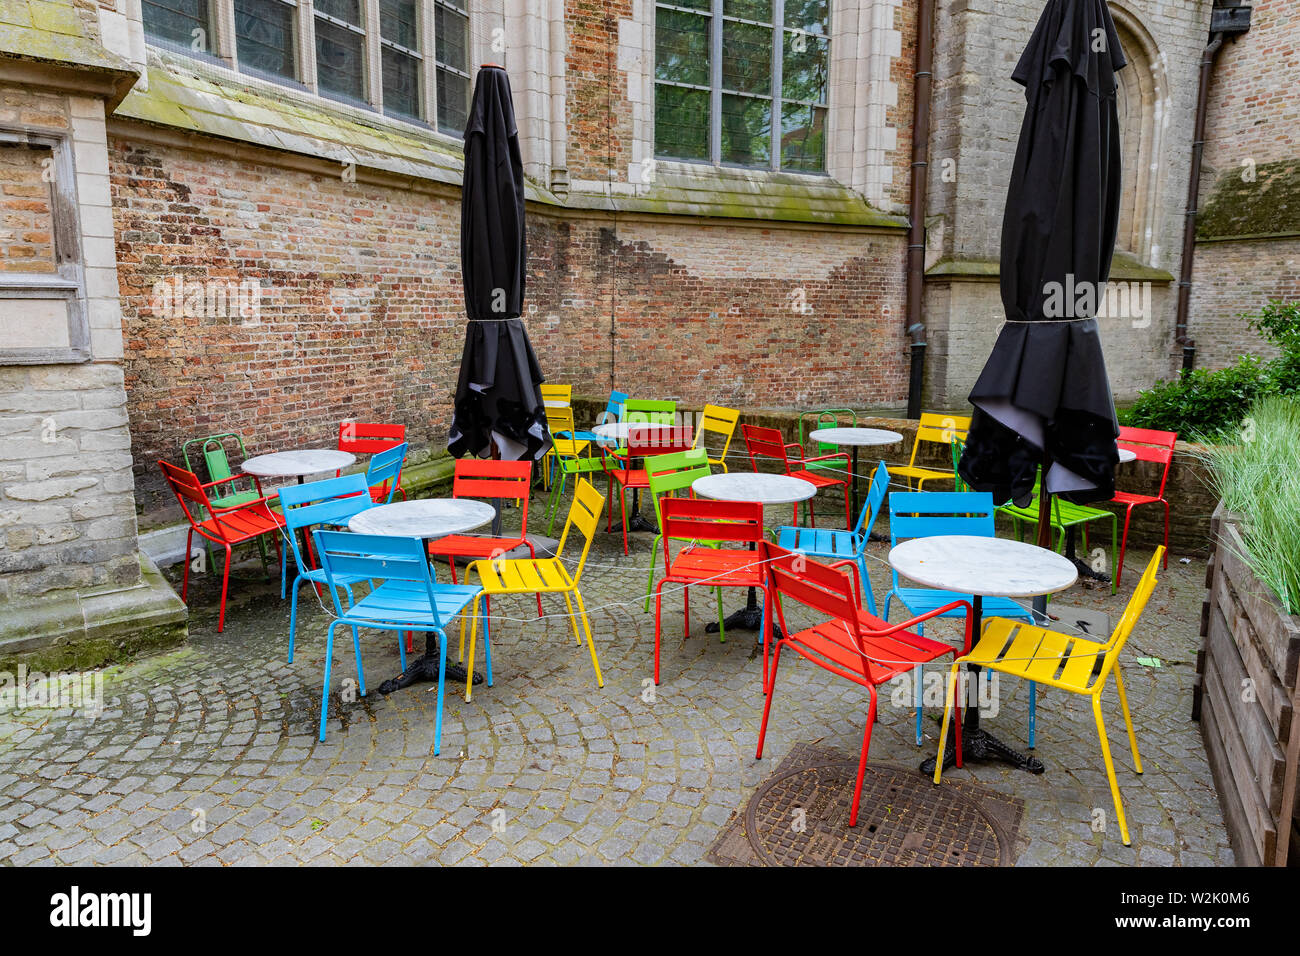 Brightly Colored Tables And Chairs In Street Cafe In Bruges